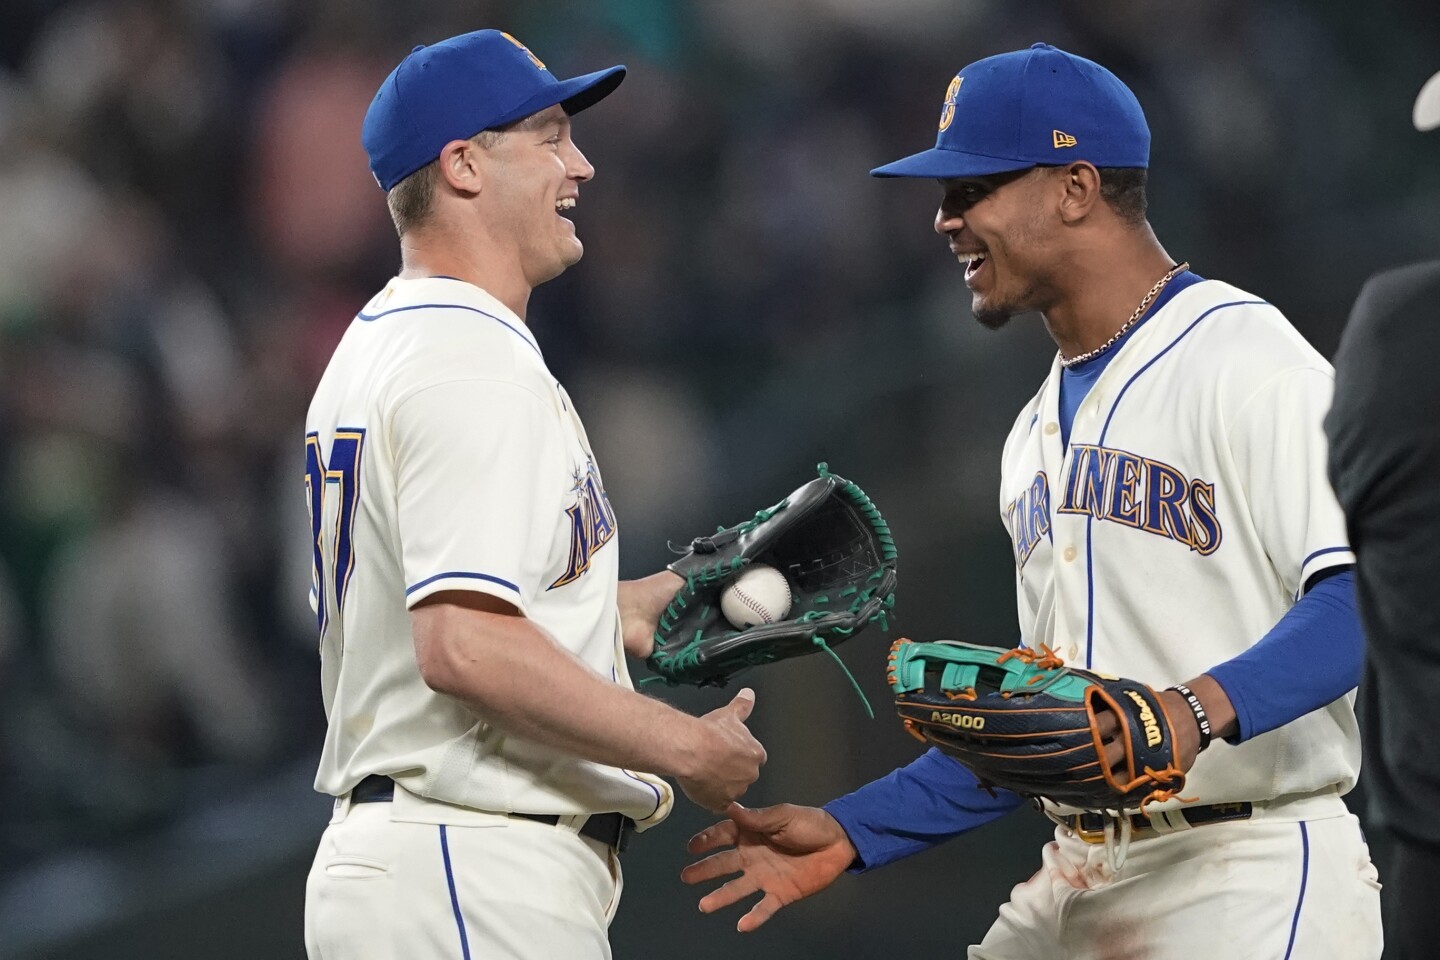 Seattle Mariners closing pitcher Paul Sewald, left, is greeted by Julio Rodriguez, right, after a baseball game against the Oakland Athletics, Sunday, July 3, 2022, in Seattle. (AP Photo/Ted S. Warren)